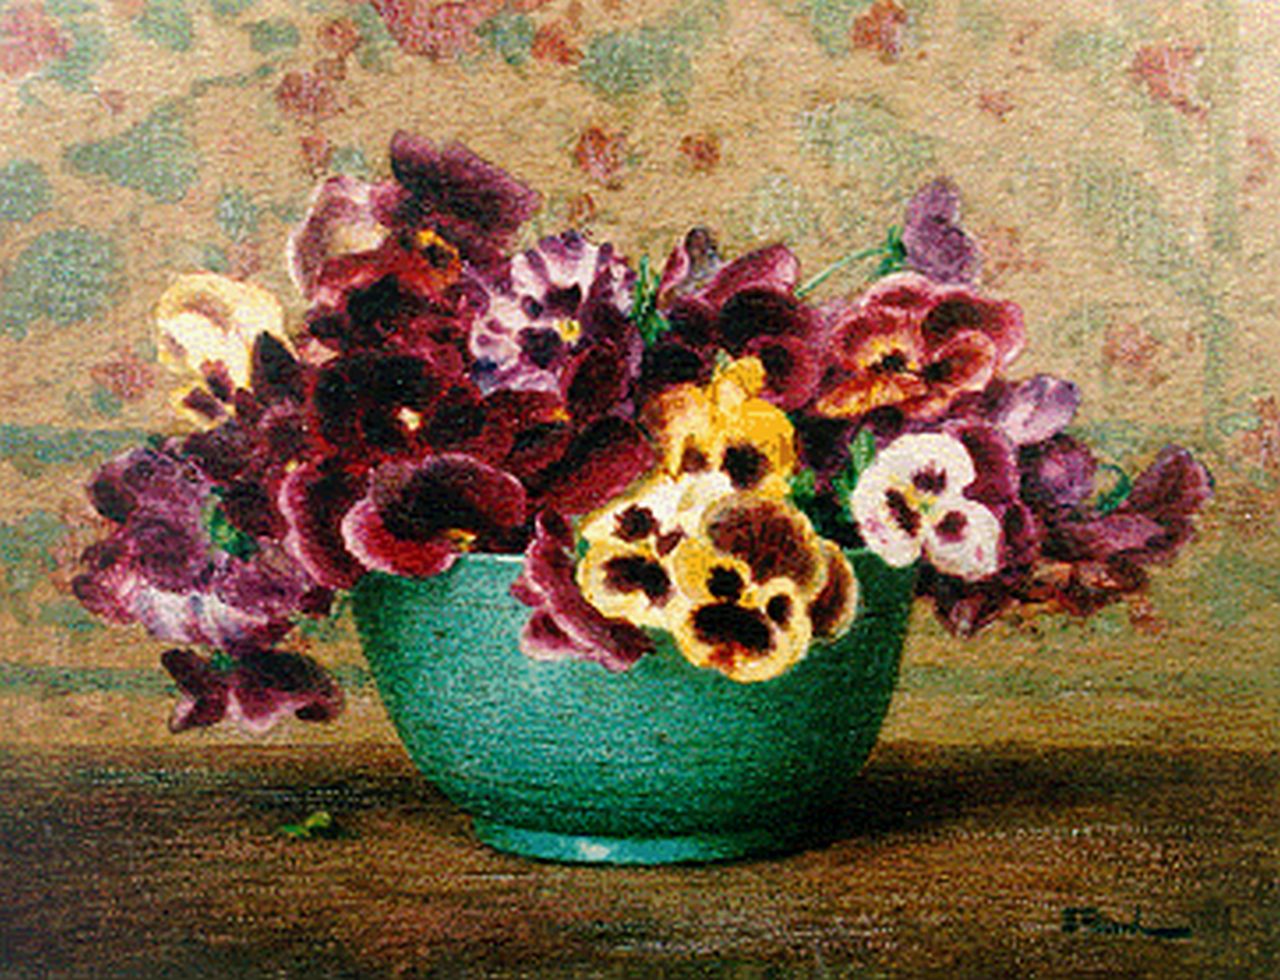 Filliard E.  | Ernest Filliard, Pansies in a bowl, watercolour on paper 26.0 x 34.0 cm, signed l.r.